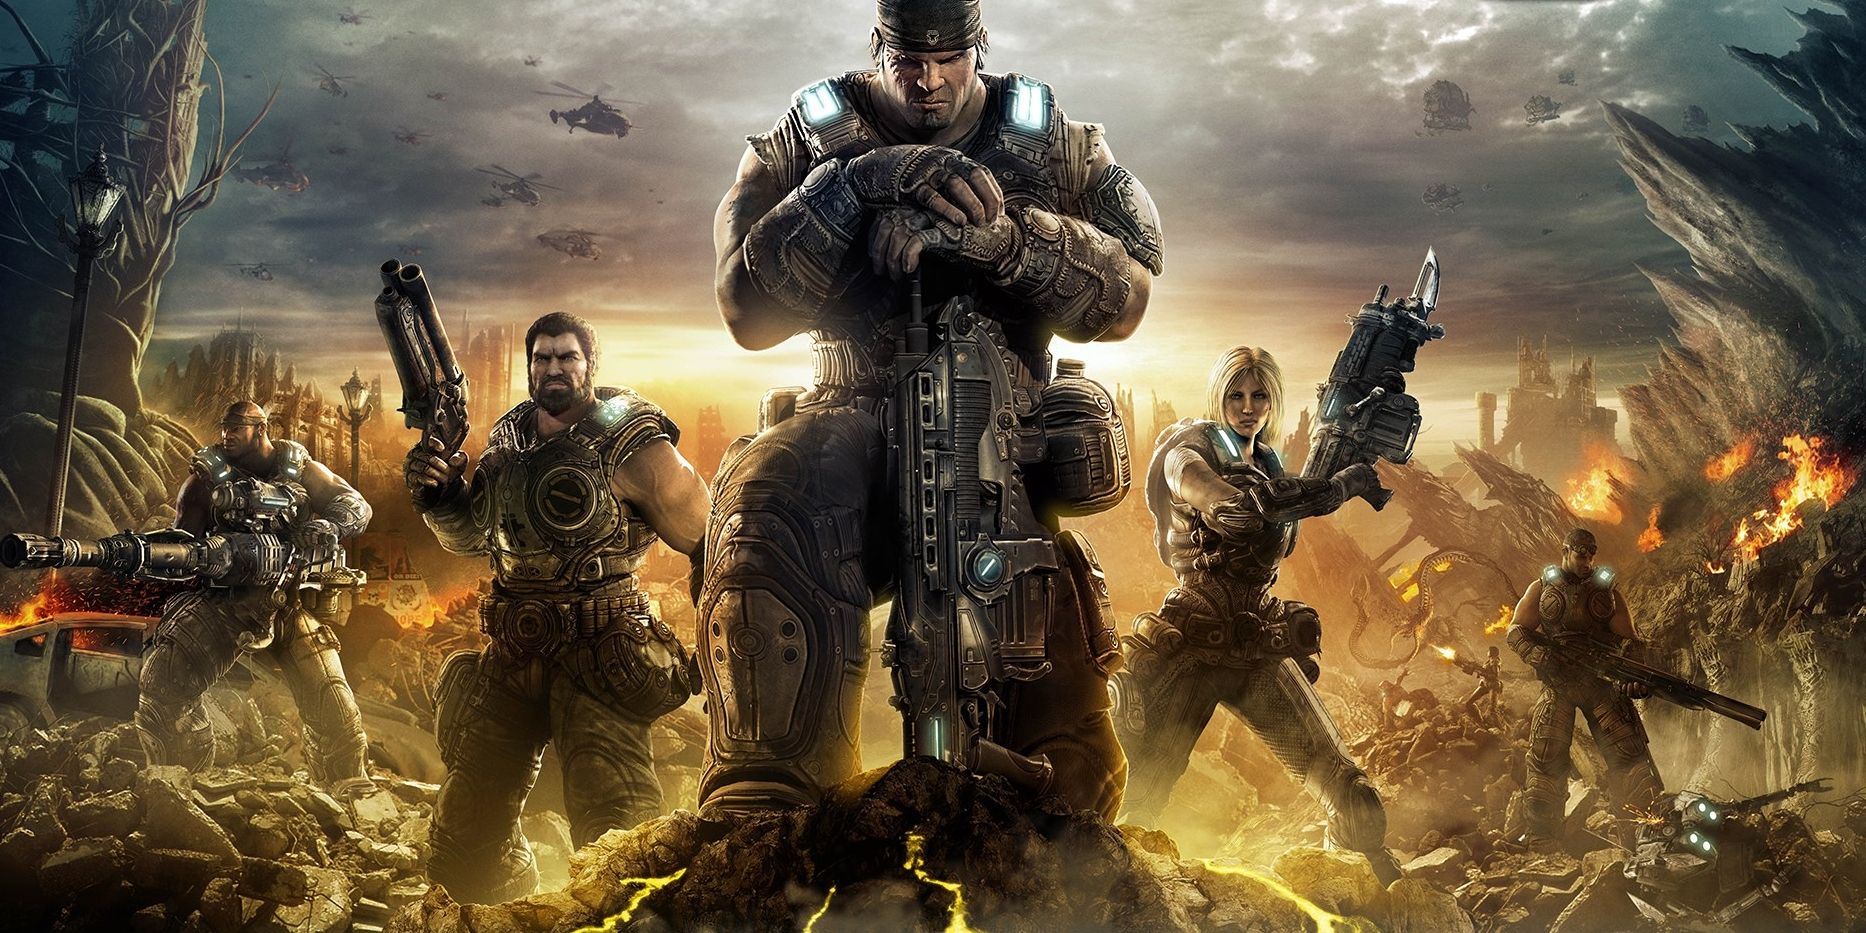 Characters from Gears of War 3 standing in a wasteland looking very depressed and determined